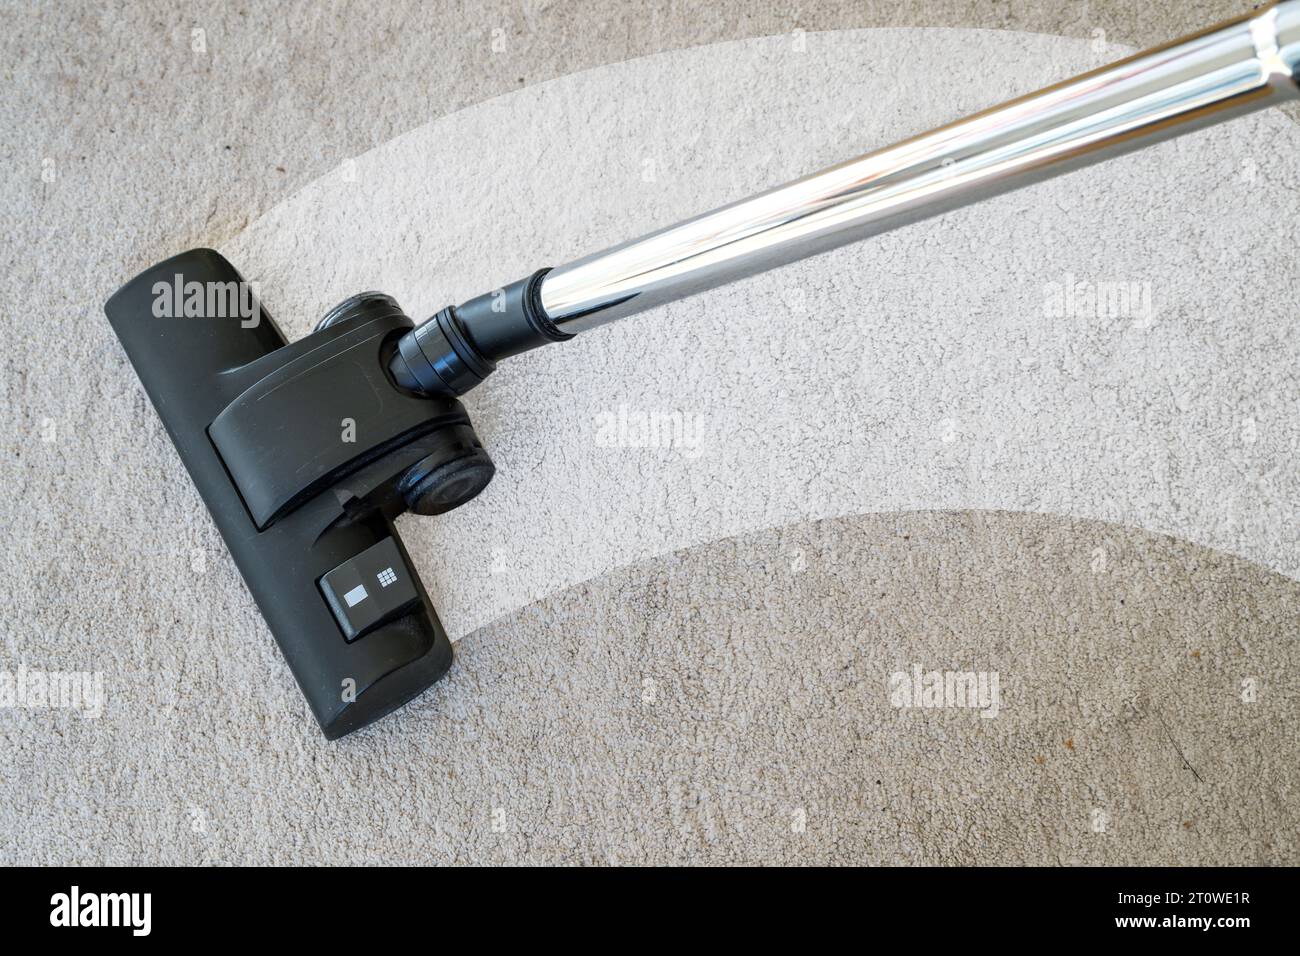 Vacuum cleaner cleaning a streak on a carpet to eliminate dirt and allergy causing house dust mites, copy space, selected focus, narrow depth of field Stock Photo